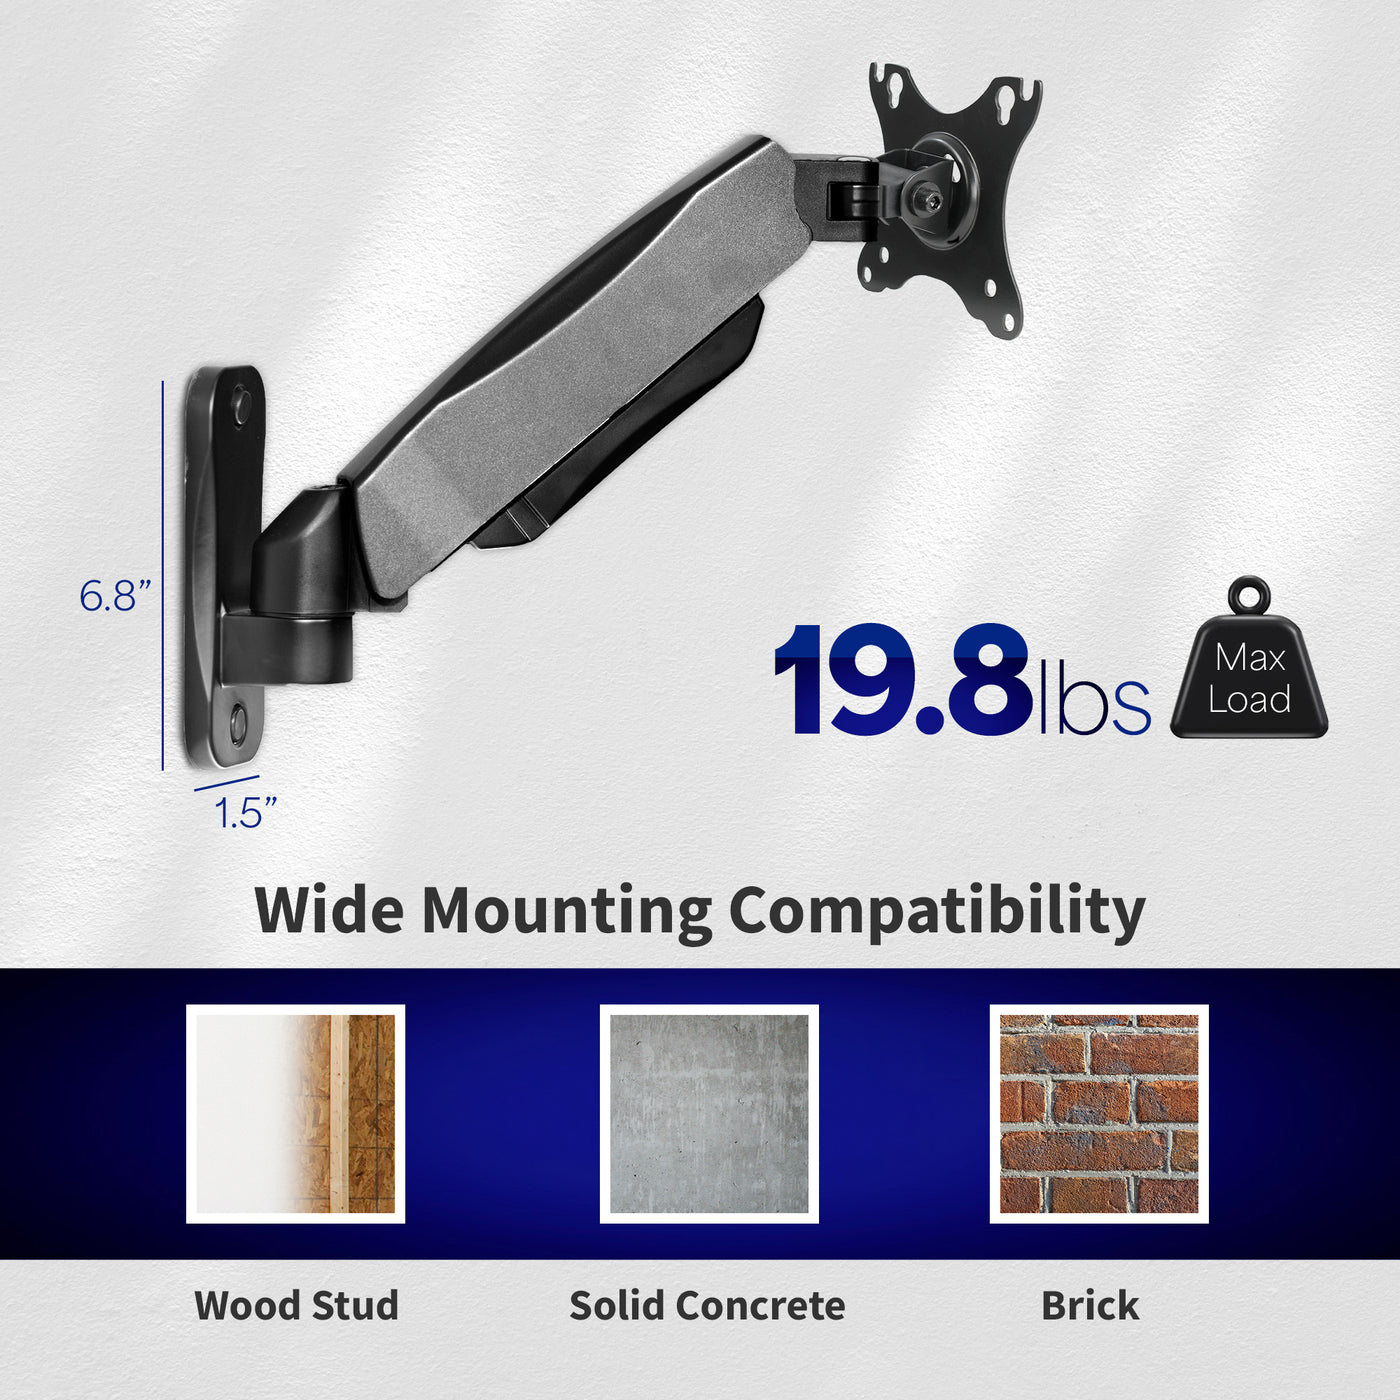 Gas Spring Monitor Wall Mount for 17" to 27" Screens has Wide Mounting Compatibility and 19.8 lb Weight Capacity.